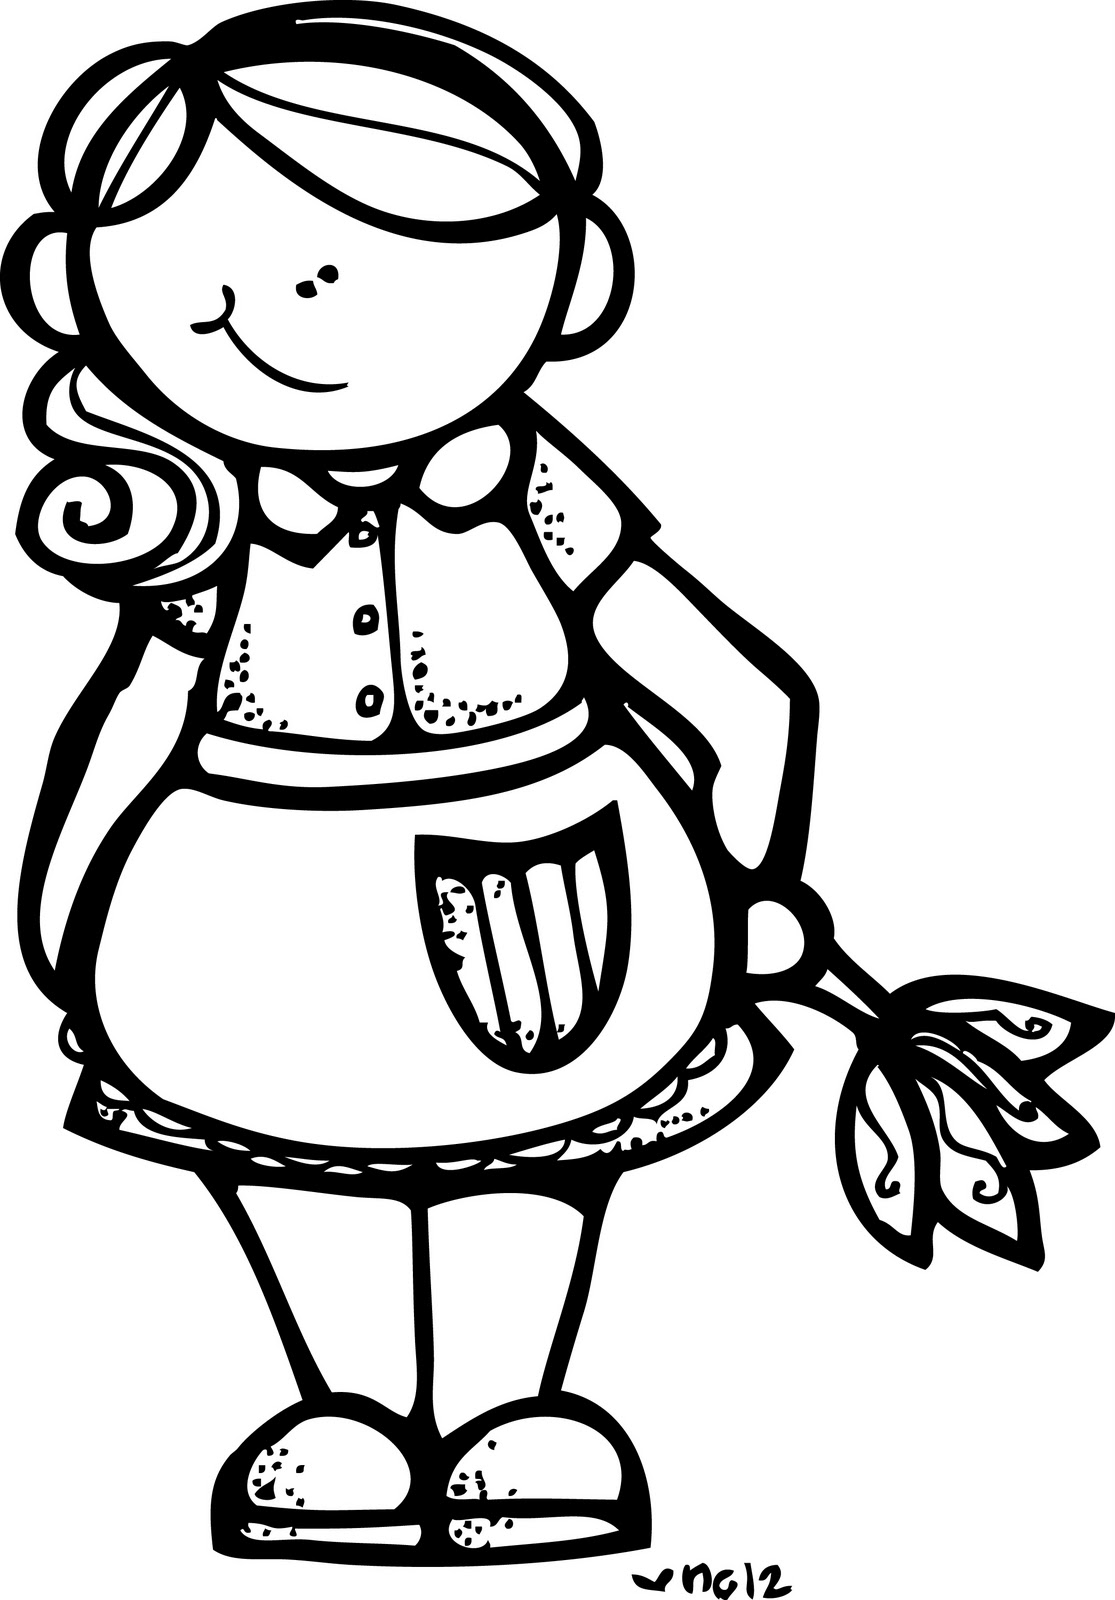 Free Chores Clipart Black And White, Download Free Chores Clipart Black